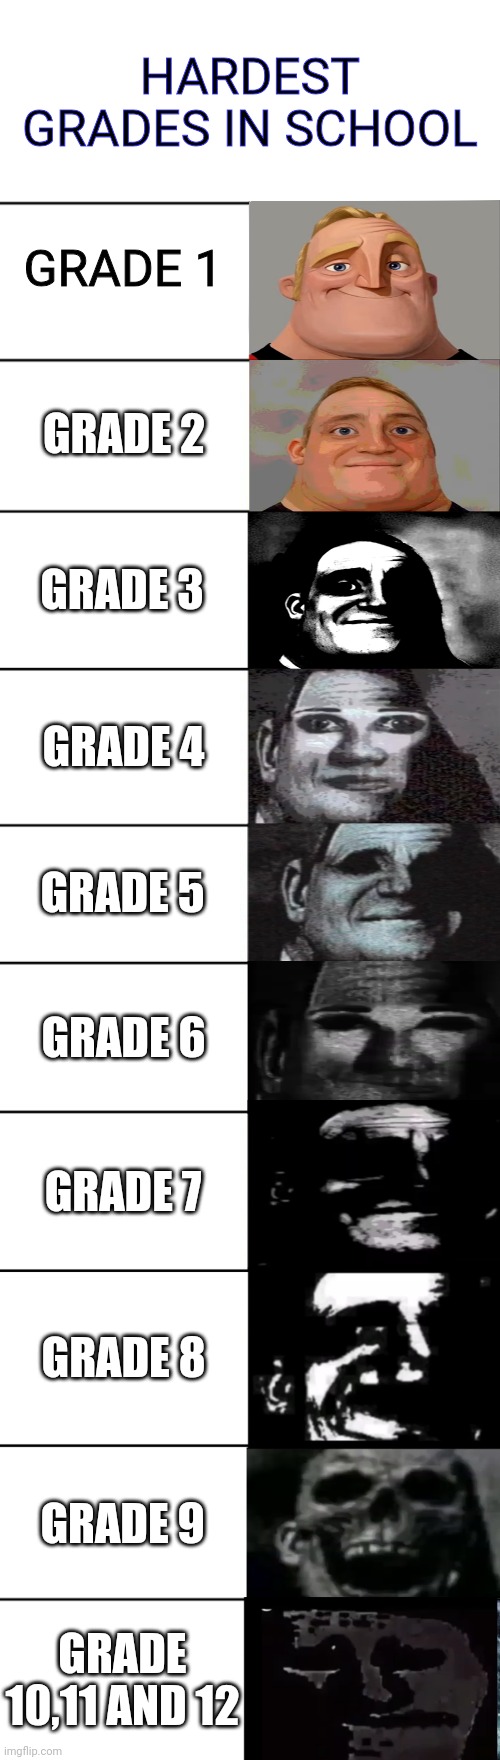 Why so hard | HARDEST GRADES IN SCHOOL; GRADE 1; GRADE 2; GRADE 3; GRADE 4; GRADE 5; GRADE 6; GRADE 7; GRADE 8; GRADE 9; GRADE 10,11 AND 12 | image tagged in mr incredible becoming uncanny,school,hard,grades,relatable memes | made w/ Imgflip meme maker